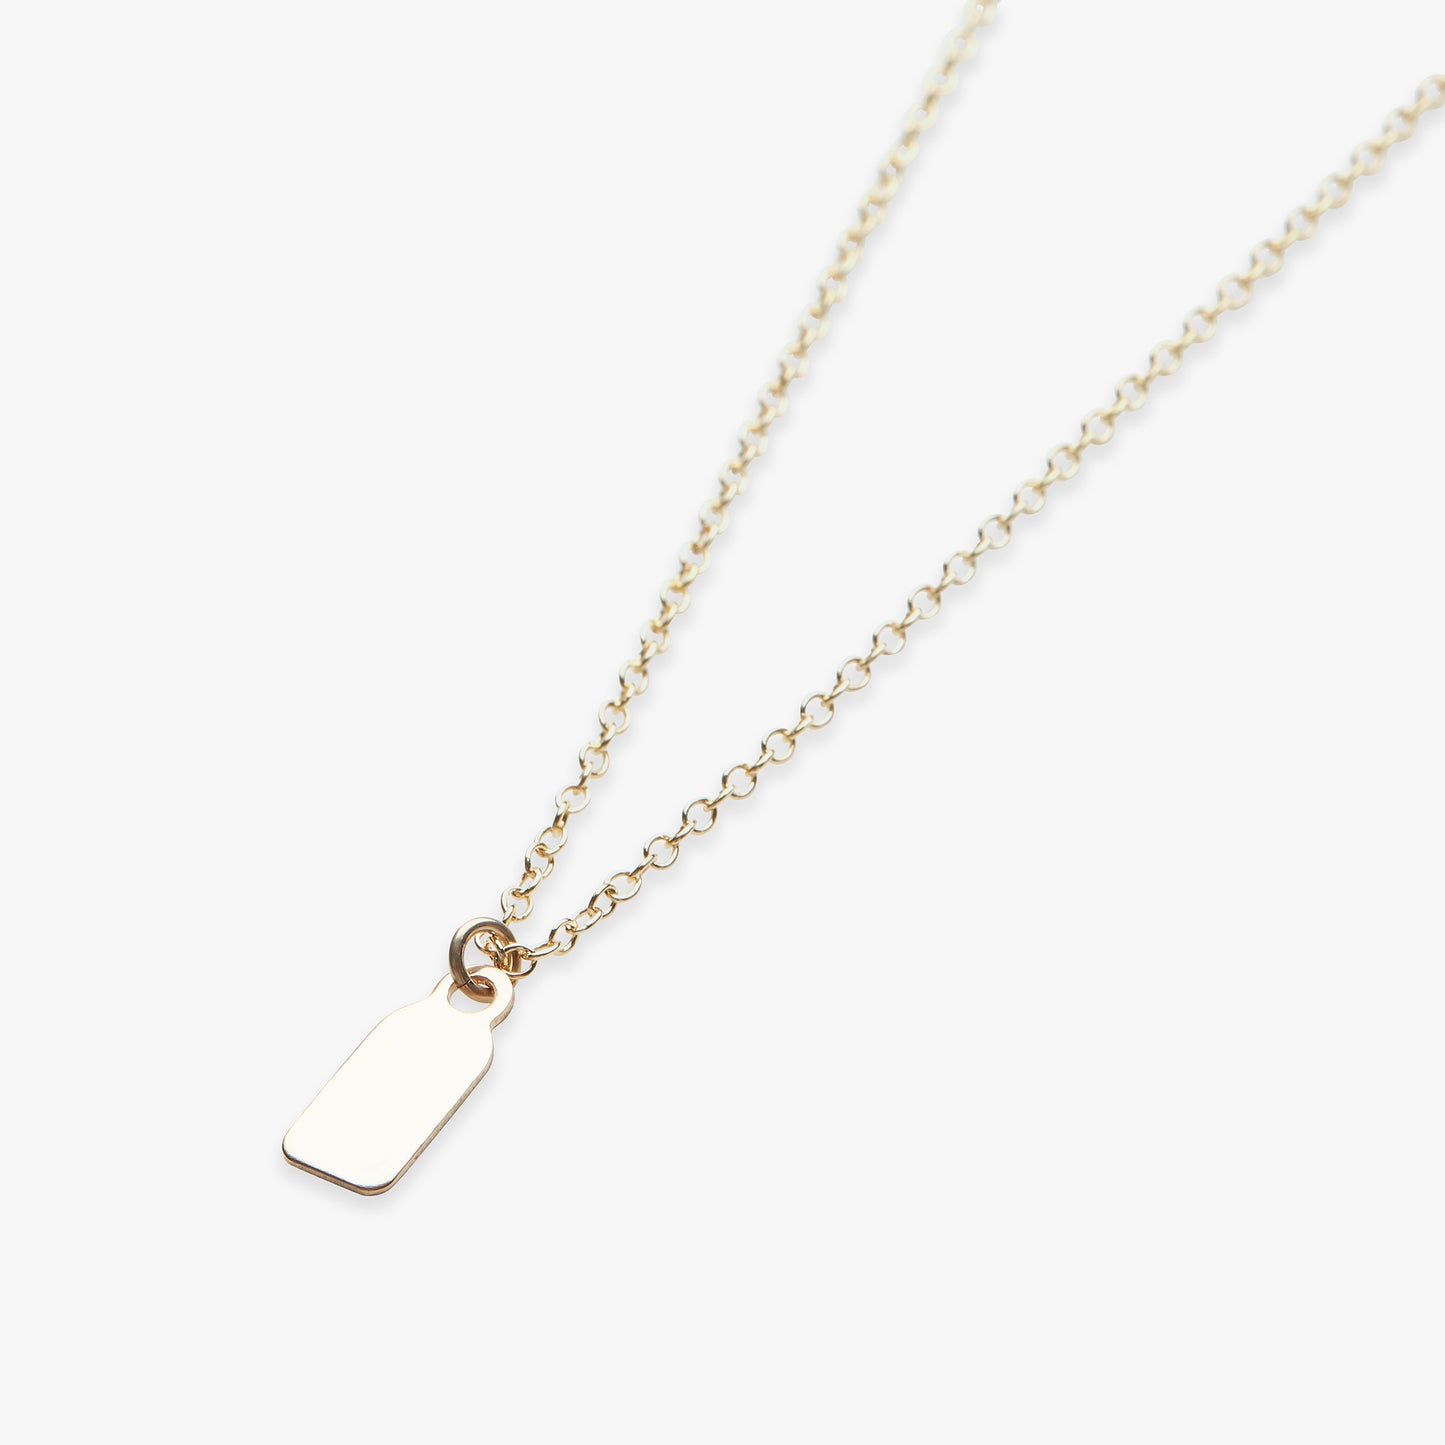 Laad afbeelding in Galerijviewer, Label ketting gold filled
